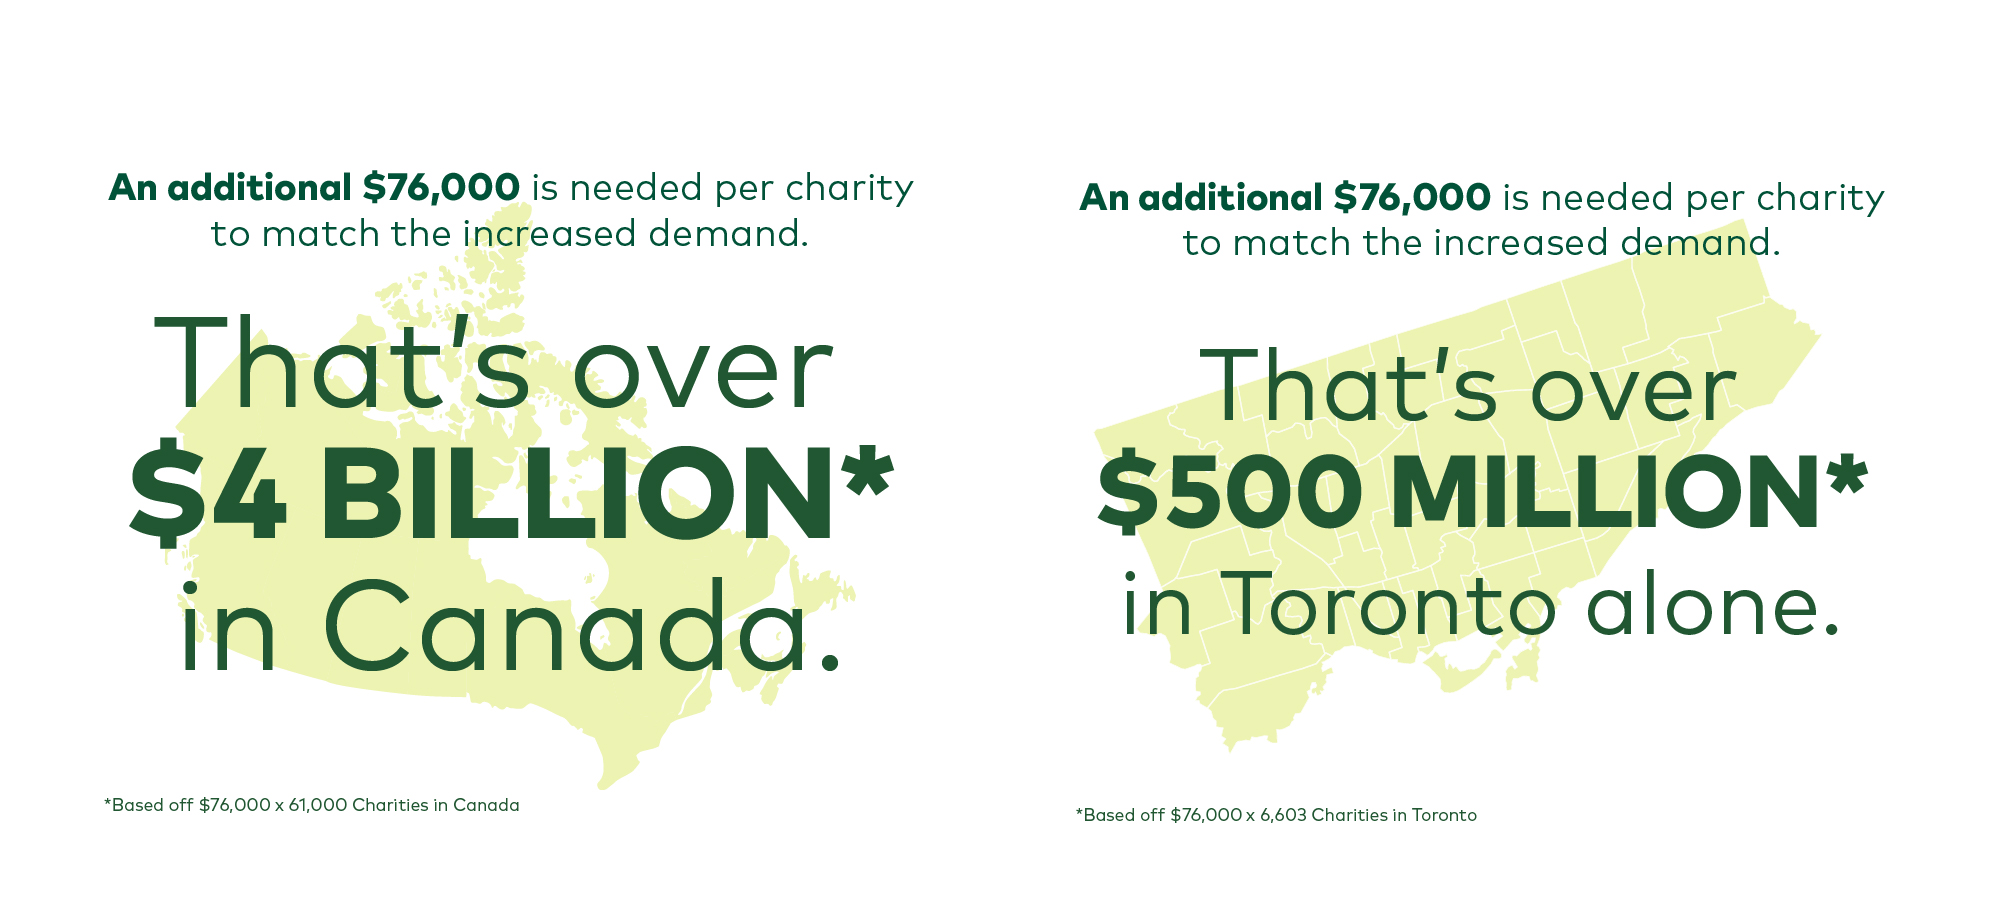 An additional $76,000 is needed per charity to match the increased demand. That's over $4 billion in Canada, based off $76,000 x 61,000 charities in Canada, and over $500 million in Toronto alone.